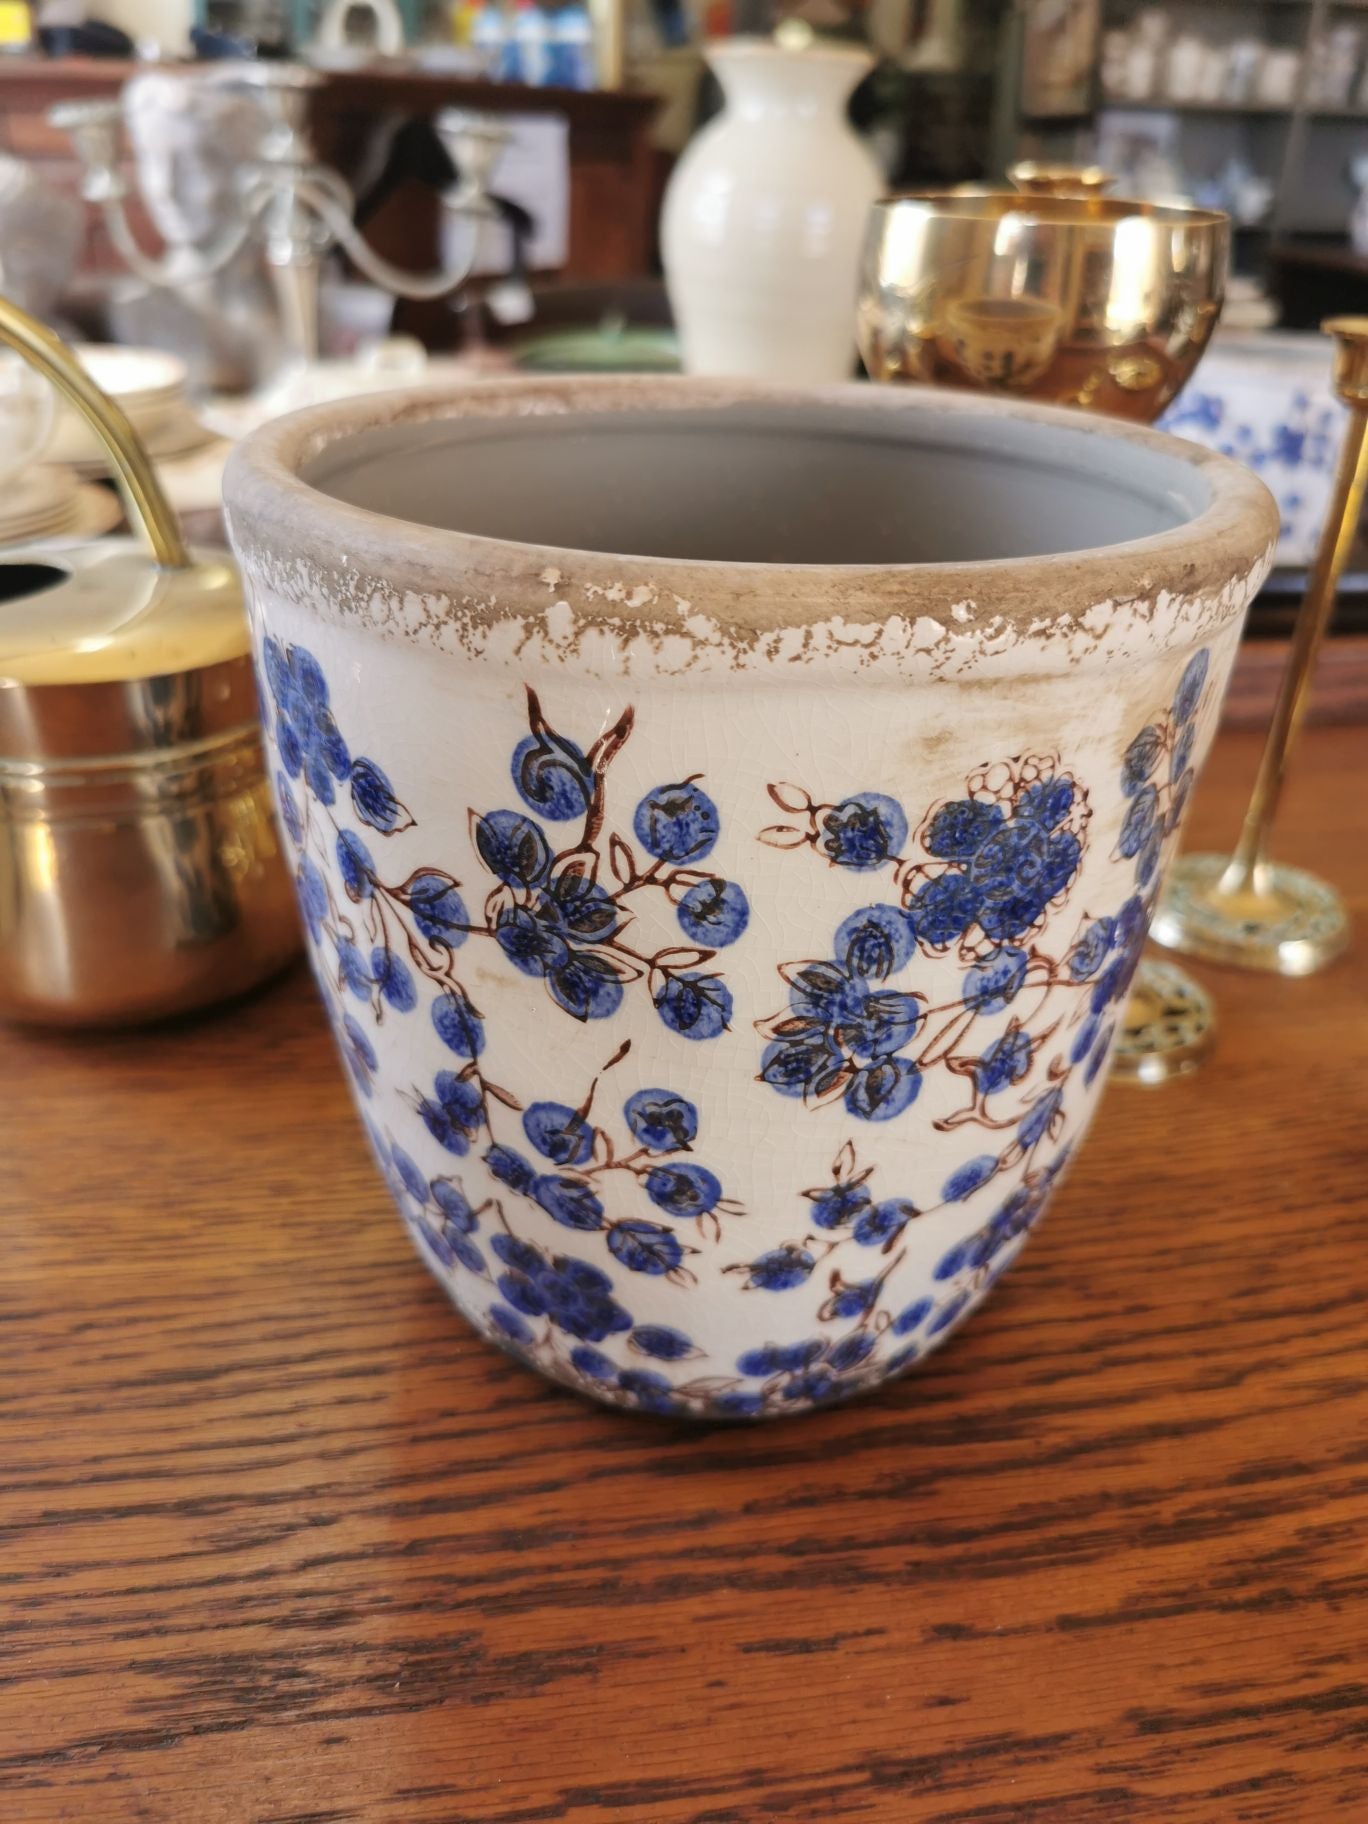 Ceramic pot - blue and brown flowers